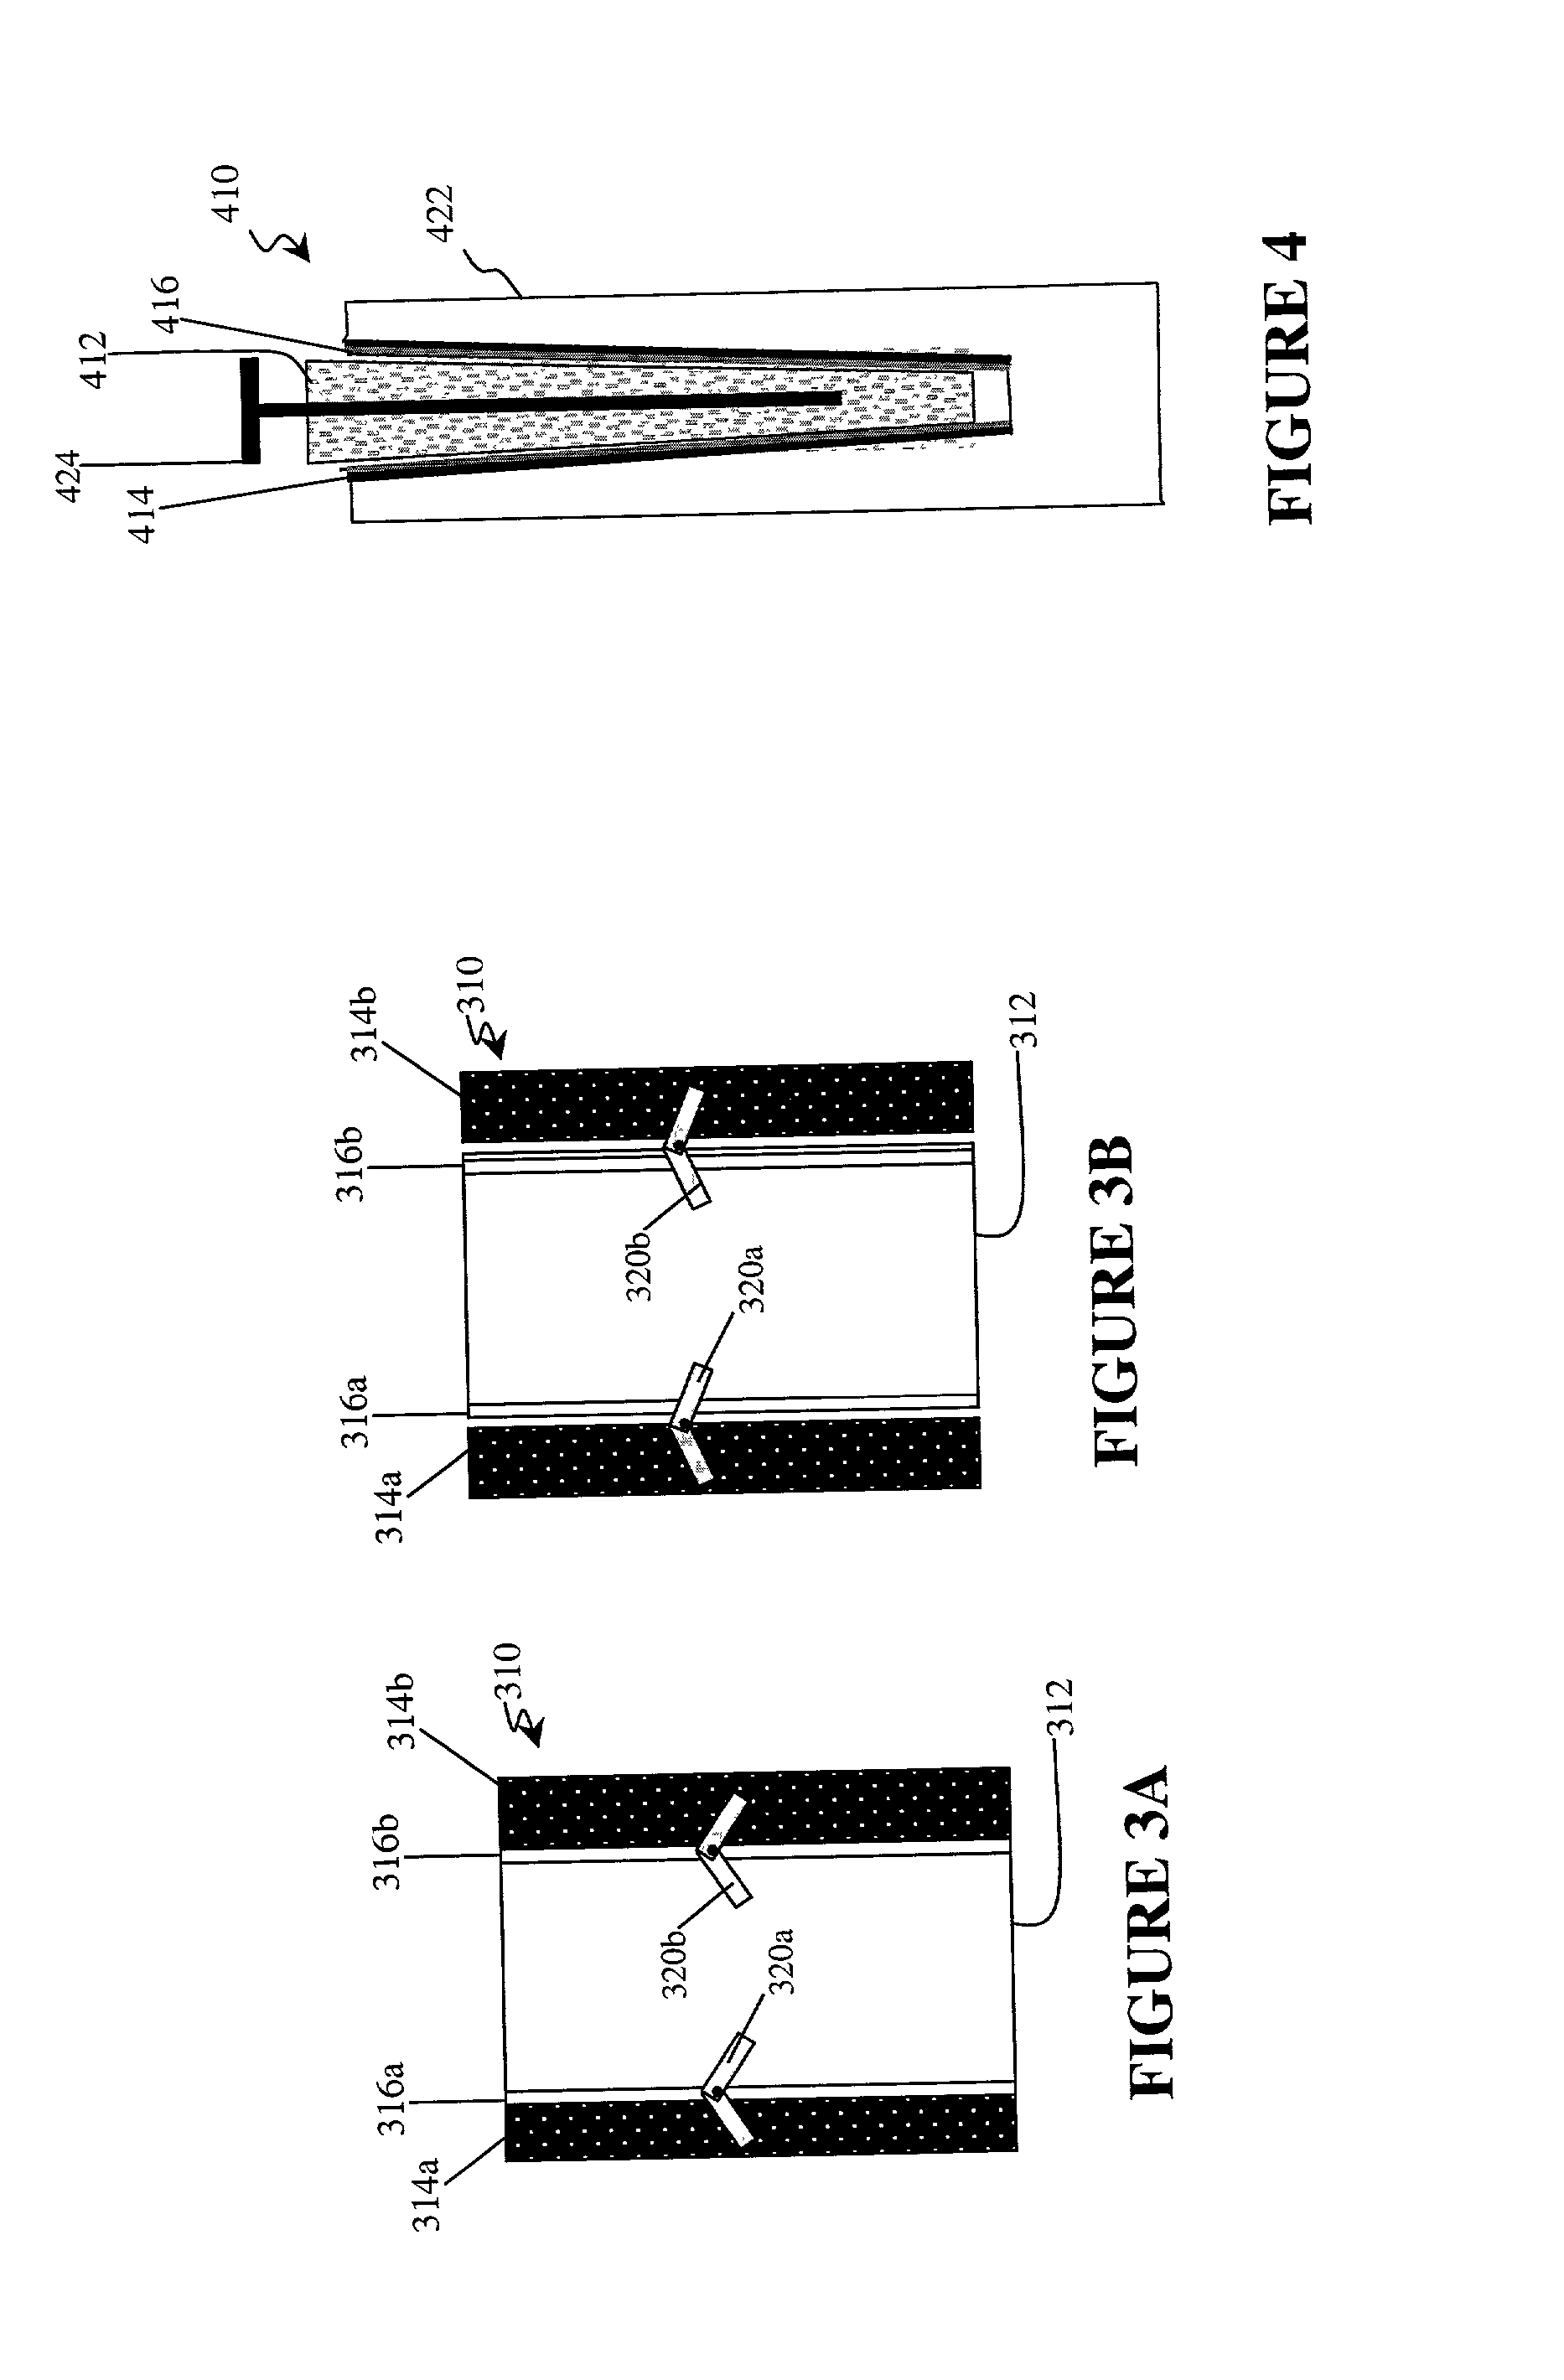 Metal air cell incorporating ionic isolation systems